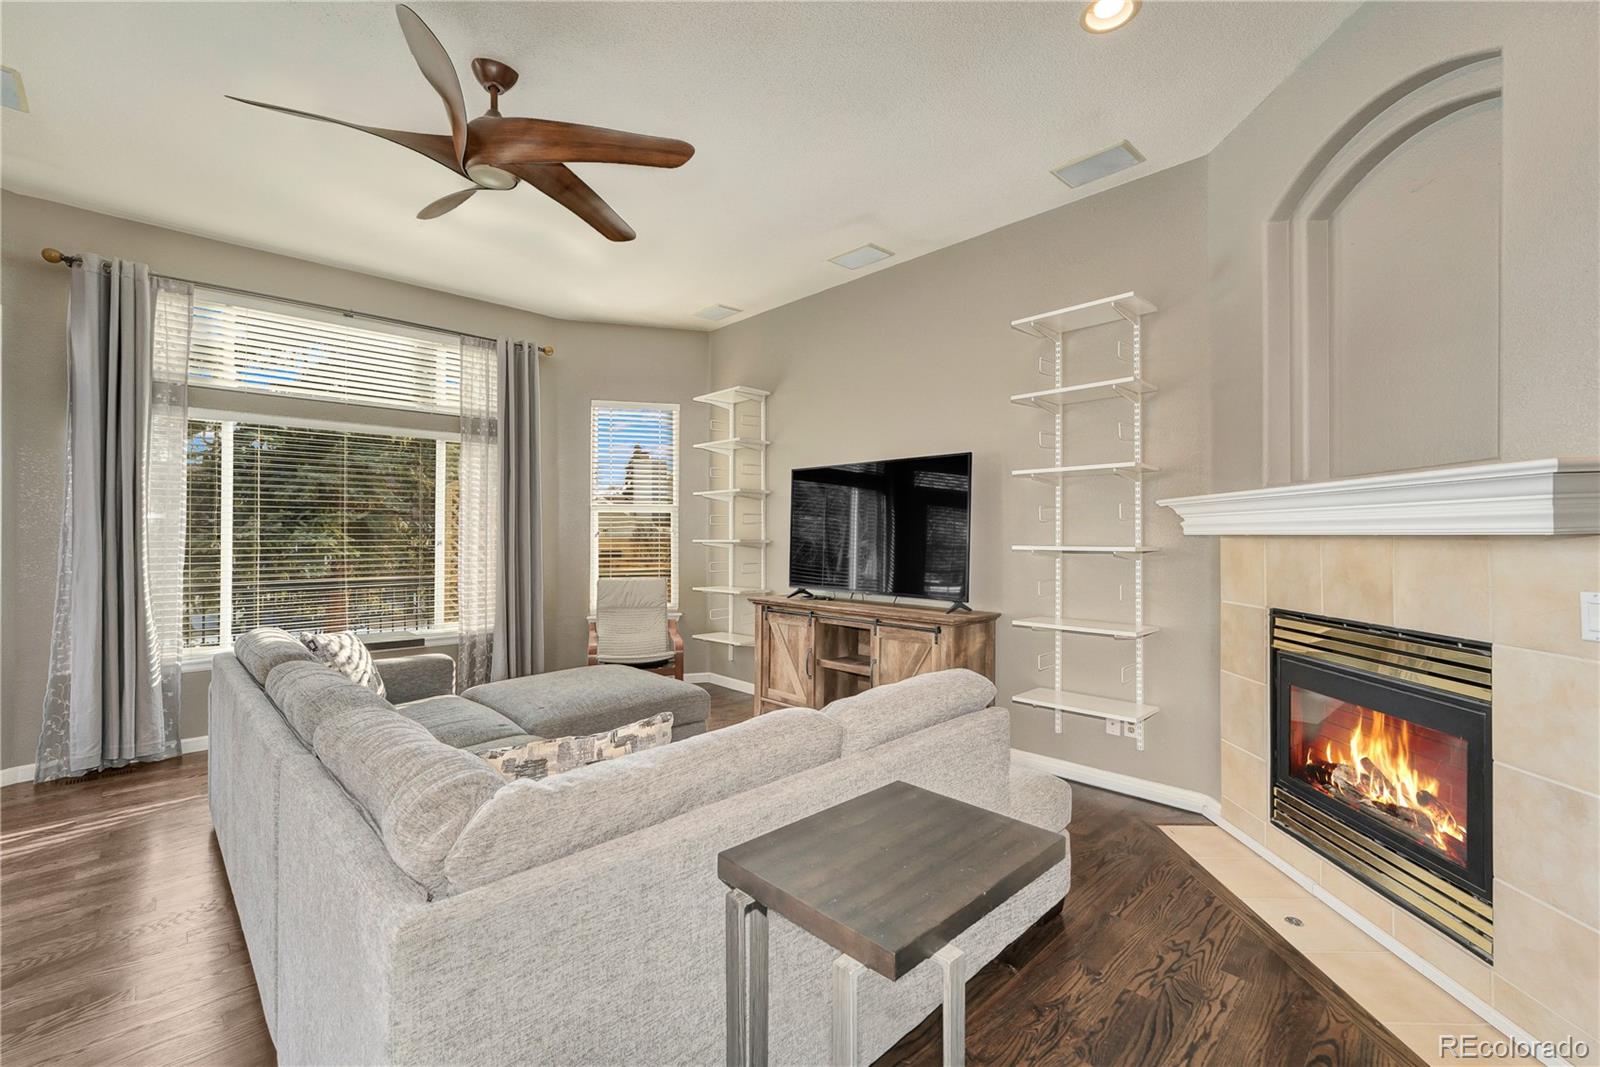 4752 103rd, Westminster, CO